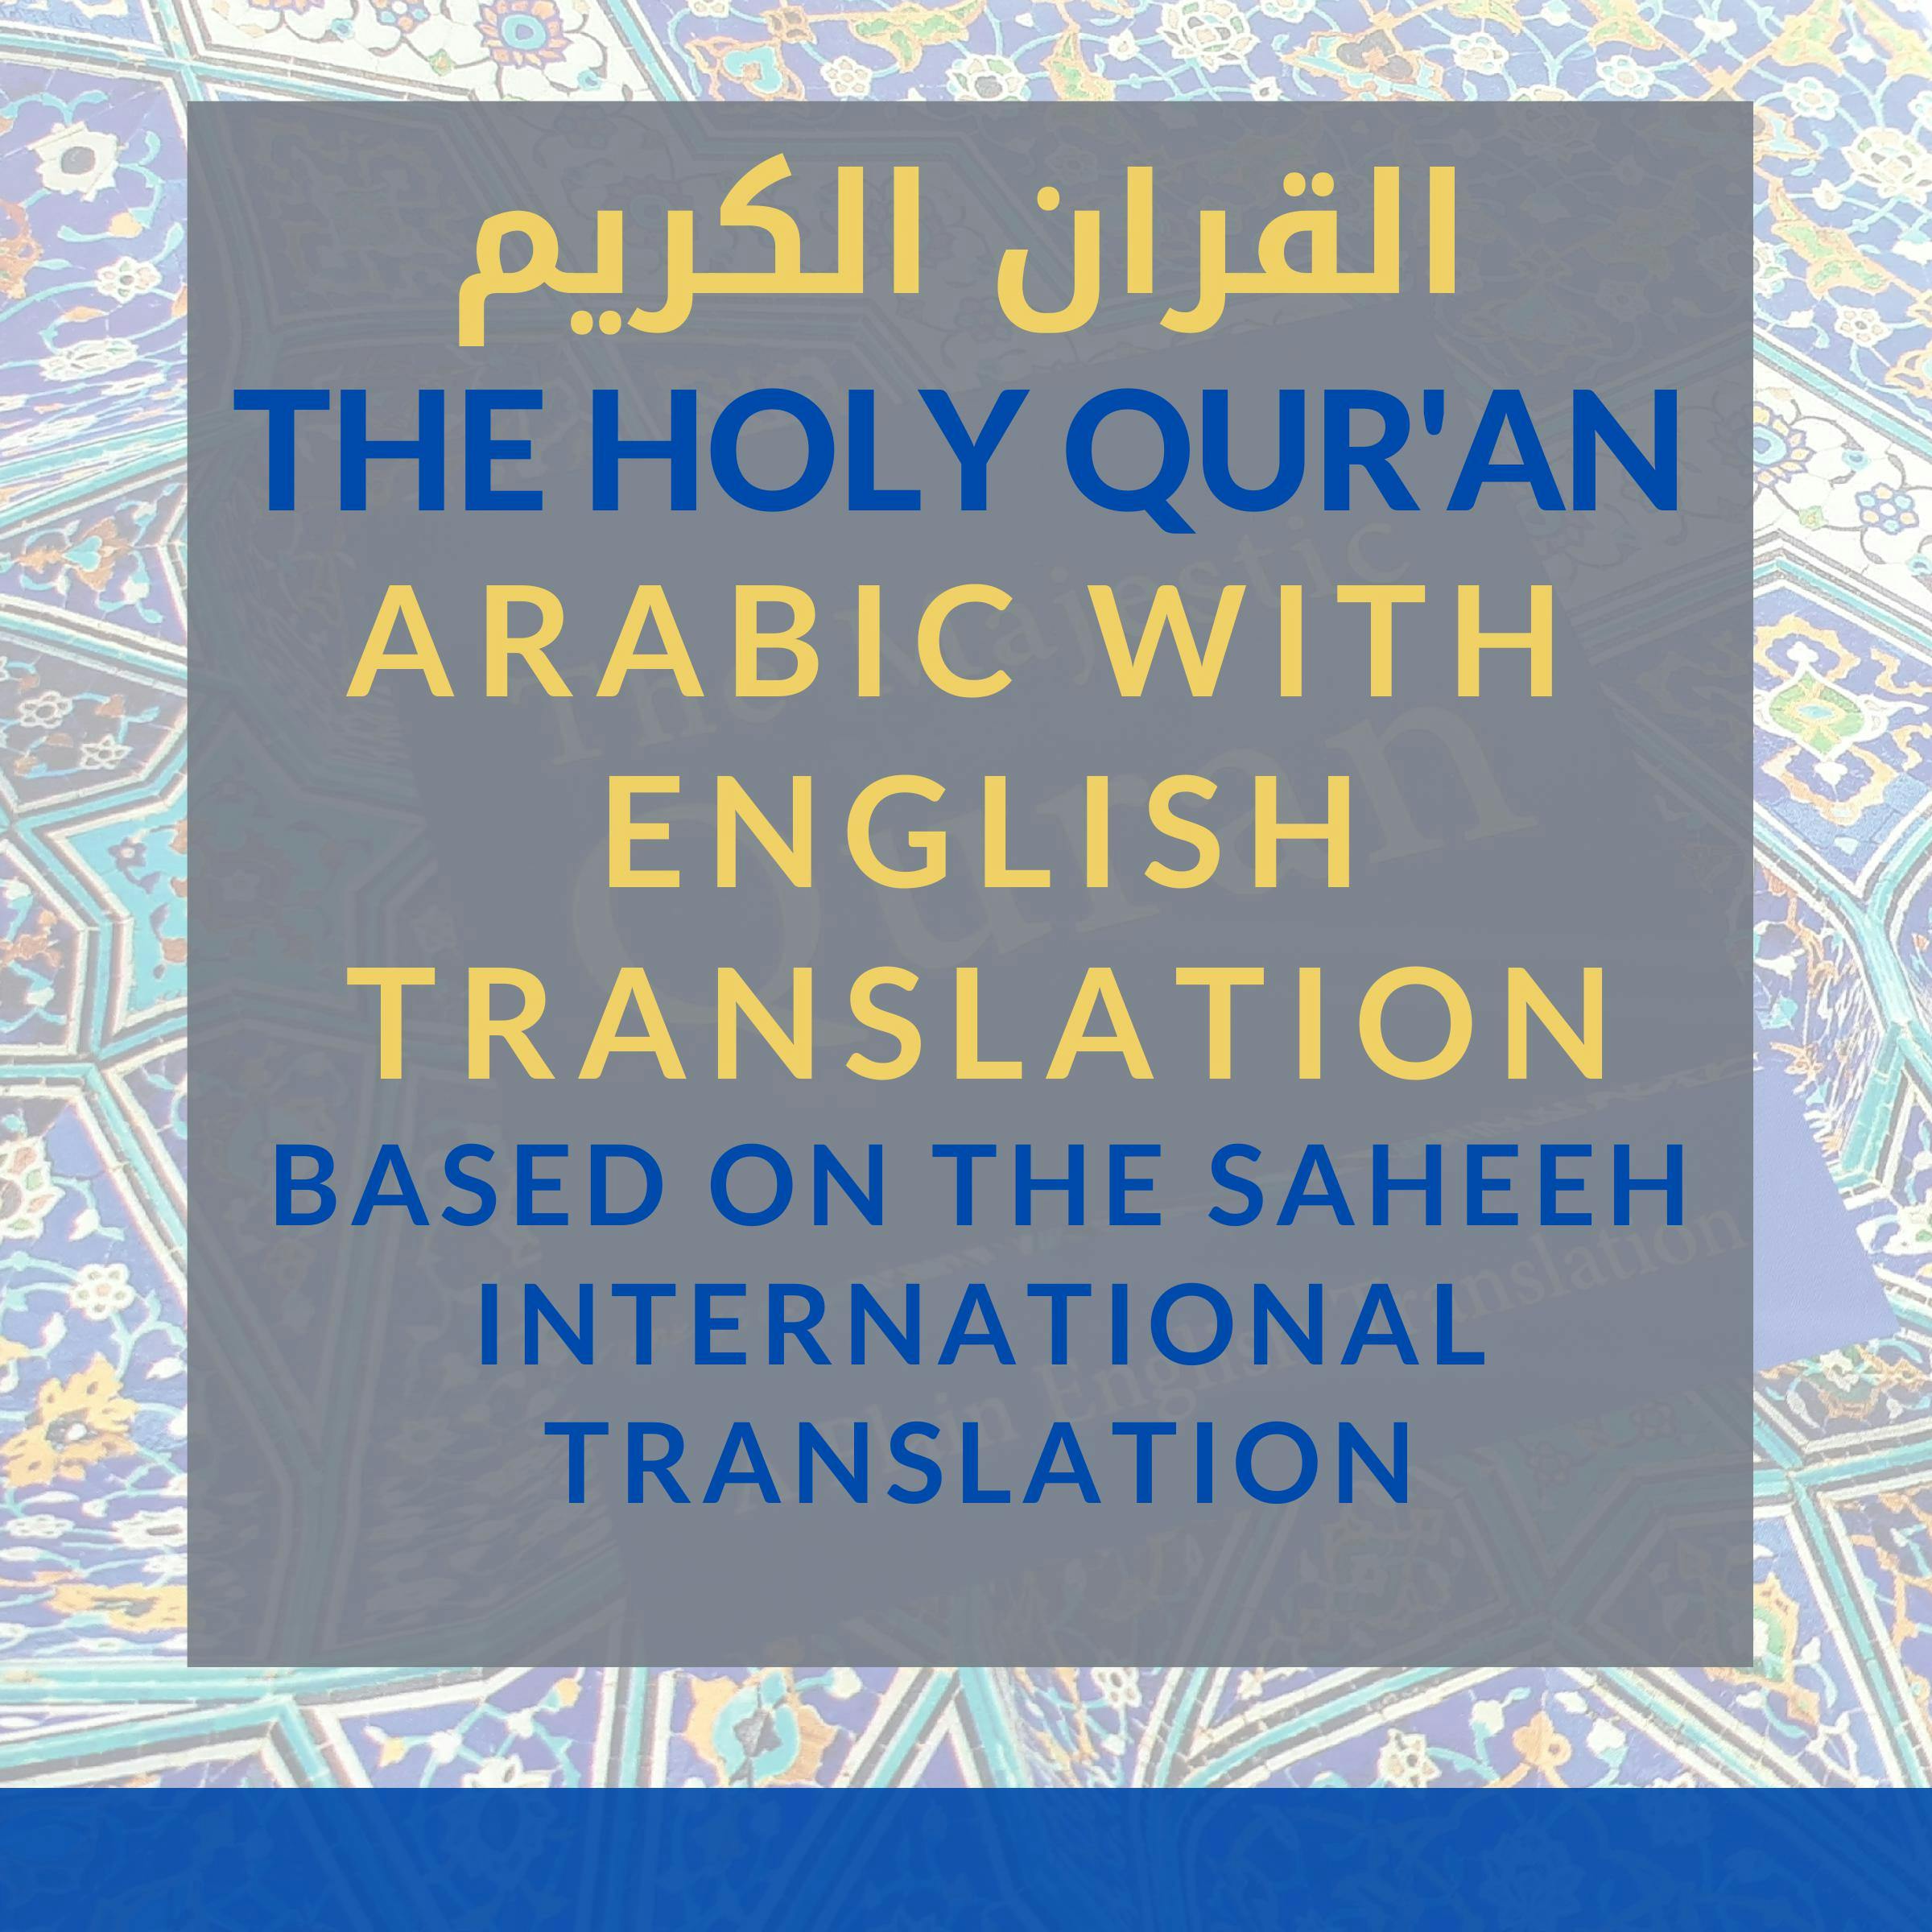 The Holy Qur'an [Arabic with English Translation]: Vol 2: Chapters 10 - 29 [Saheeh International Translation] - The Holy Quran